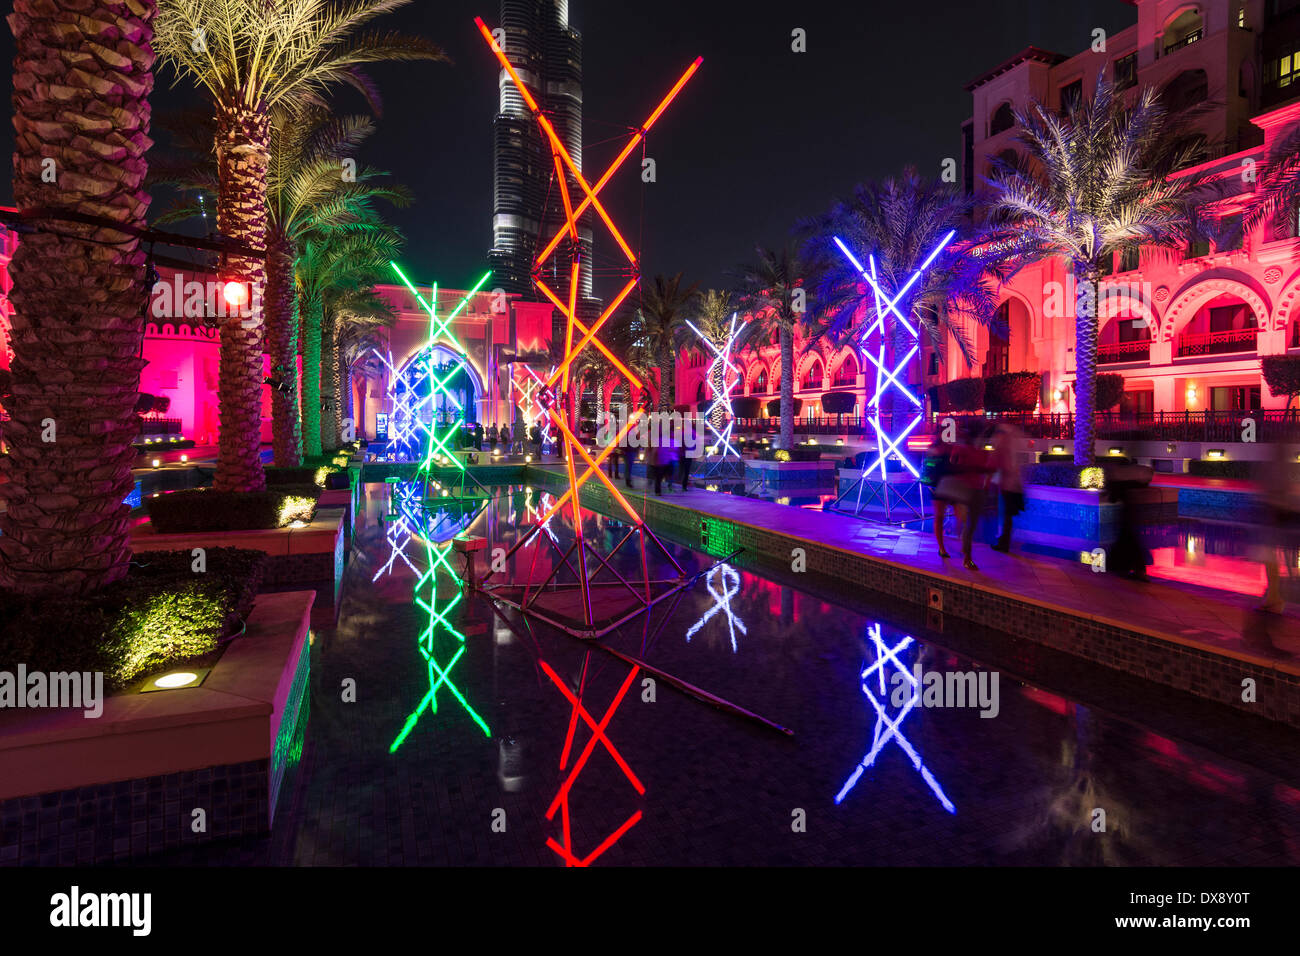 Dubai, United Arab Emirates 20 March  2014; Mikado light sculpture by Edouard Levine illuminating Souk al Bahar at opening night of the inaugural Dubai Festival of Lights held in Downtown area with many light and video based works of art Credit:  Iain Masterton/Alamy Live News Stock Photo